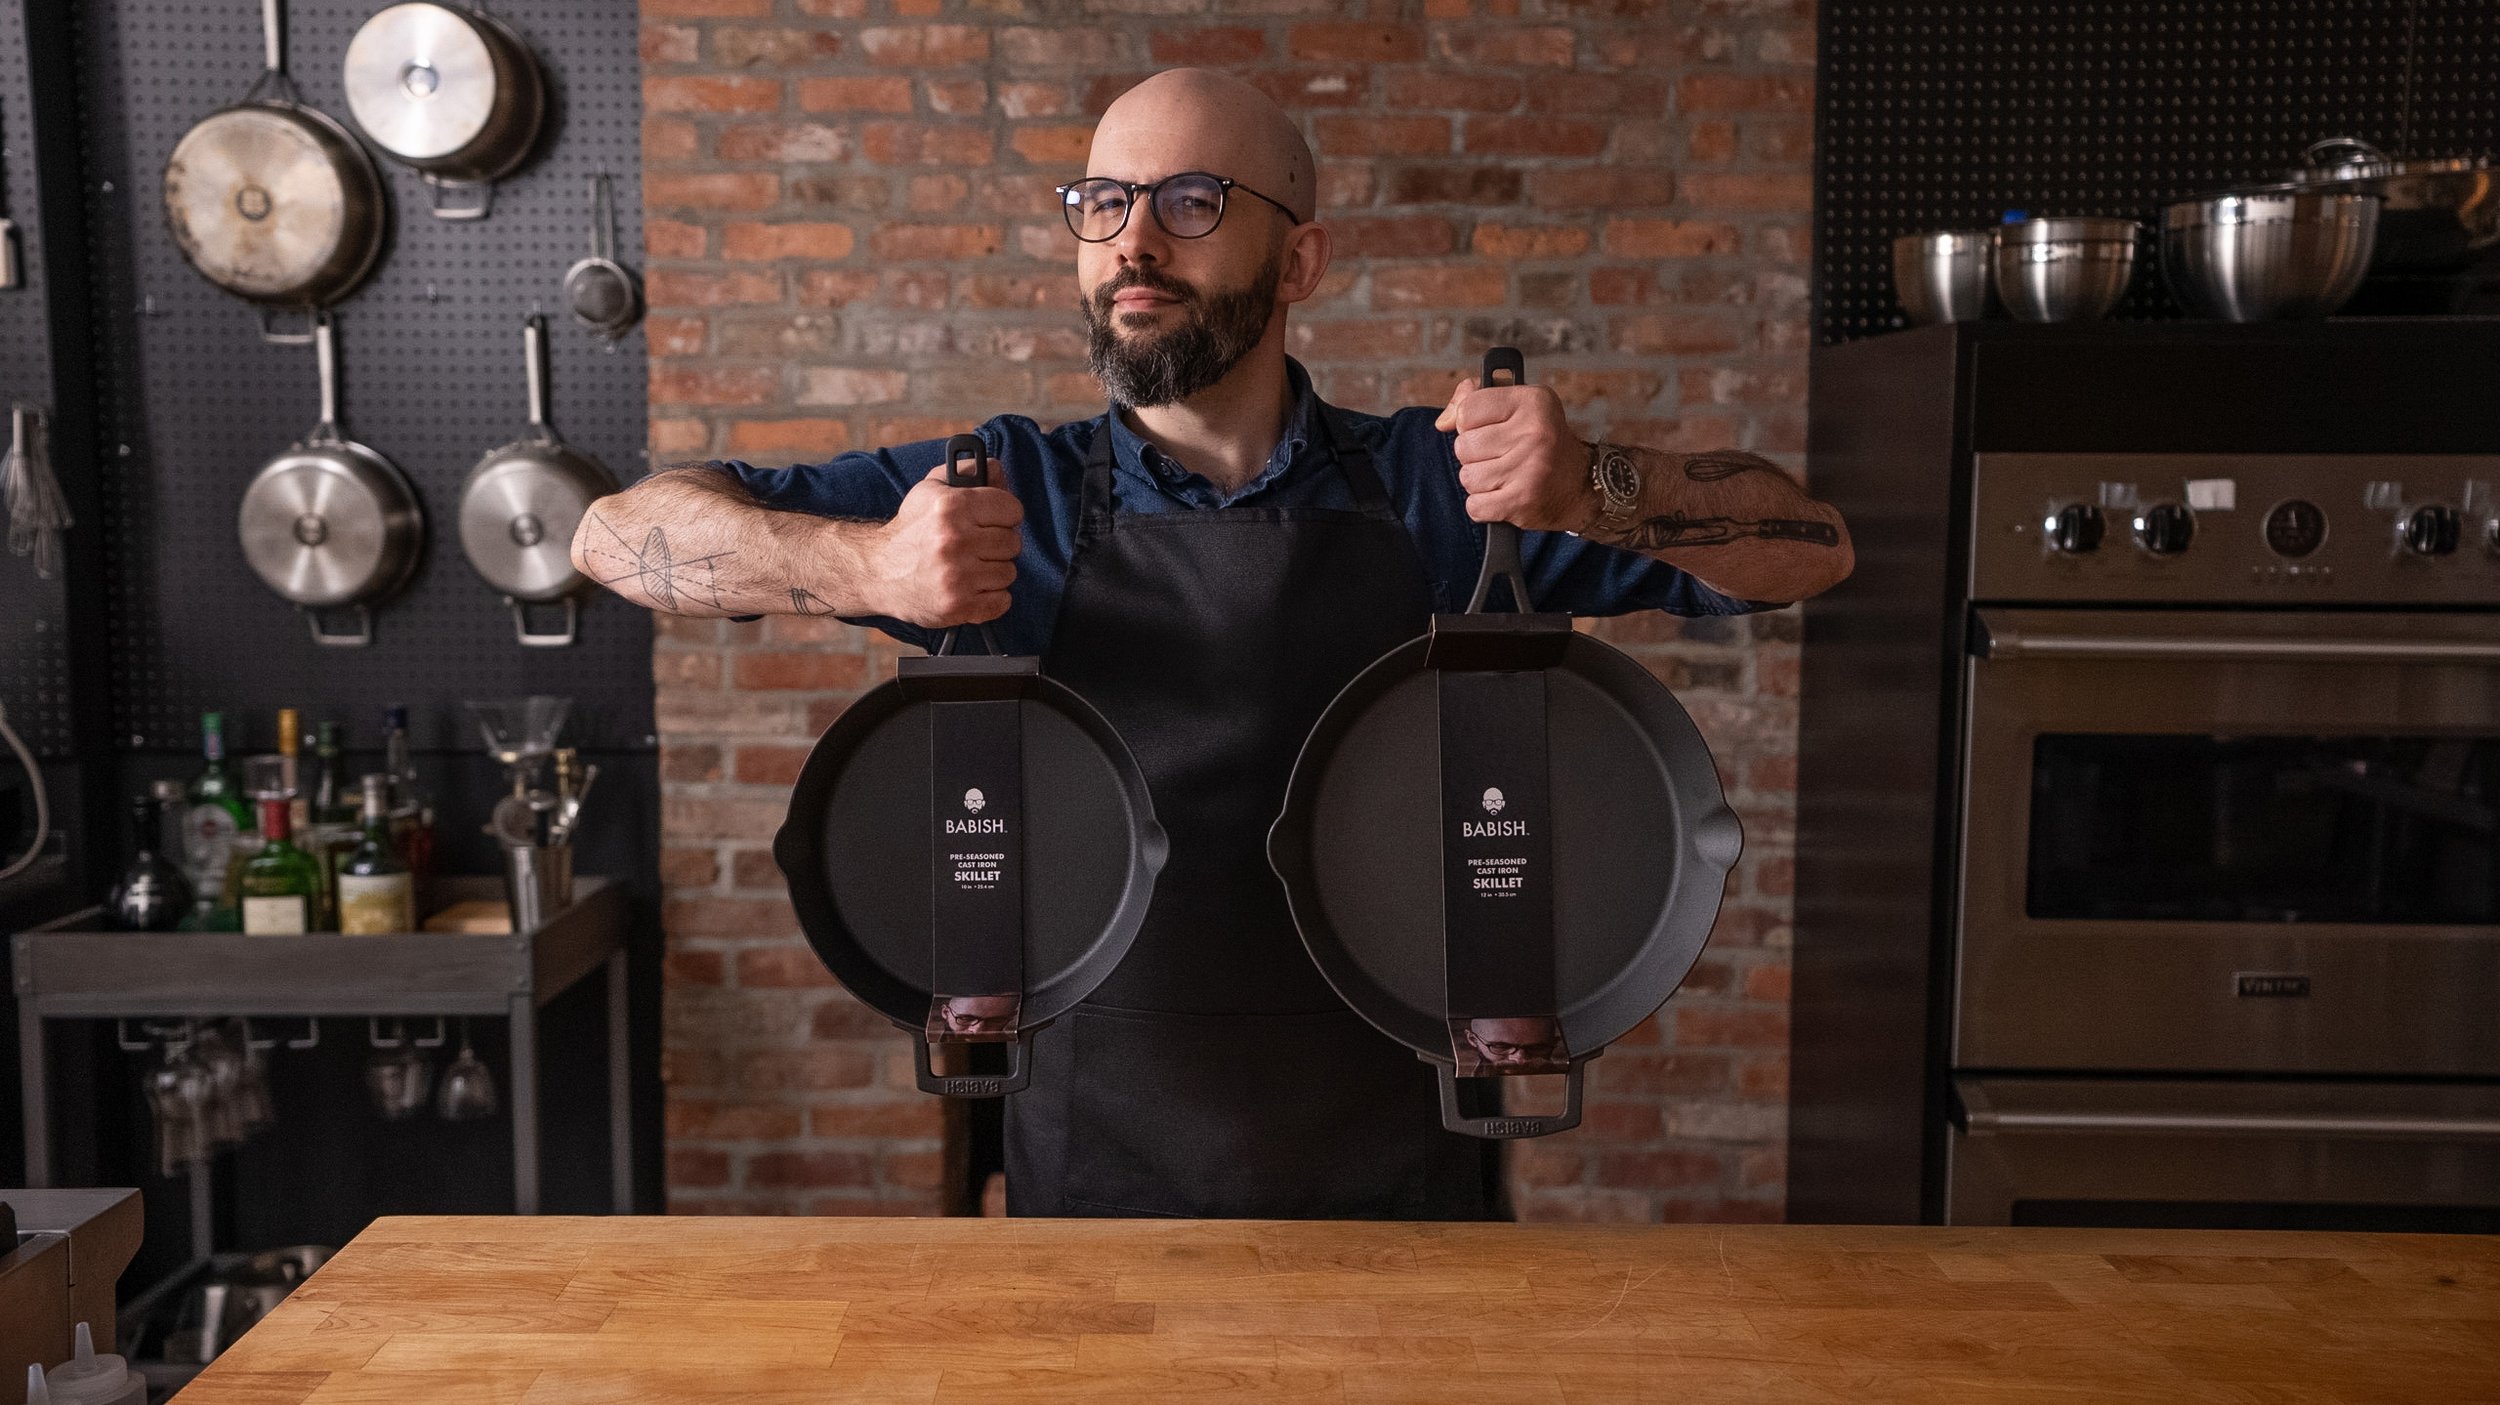 Babish has a Tiny Whisk – The Cutlery Review